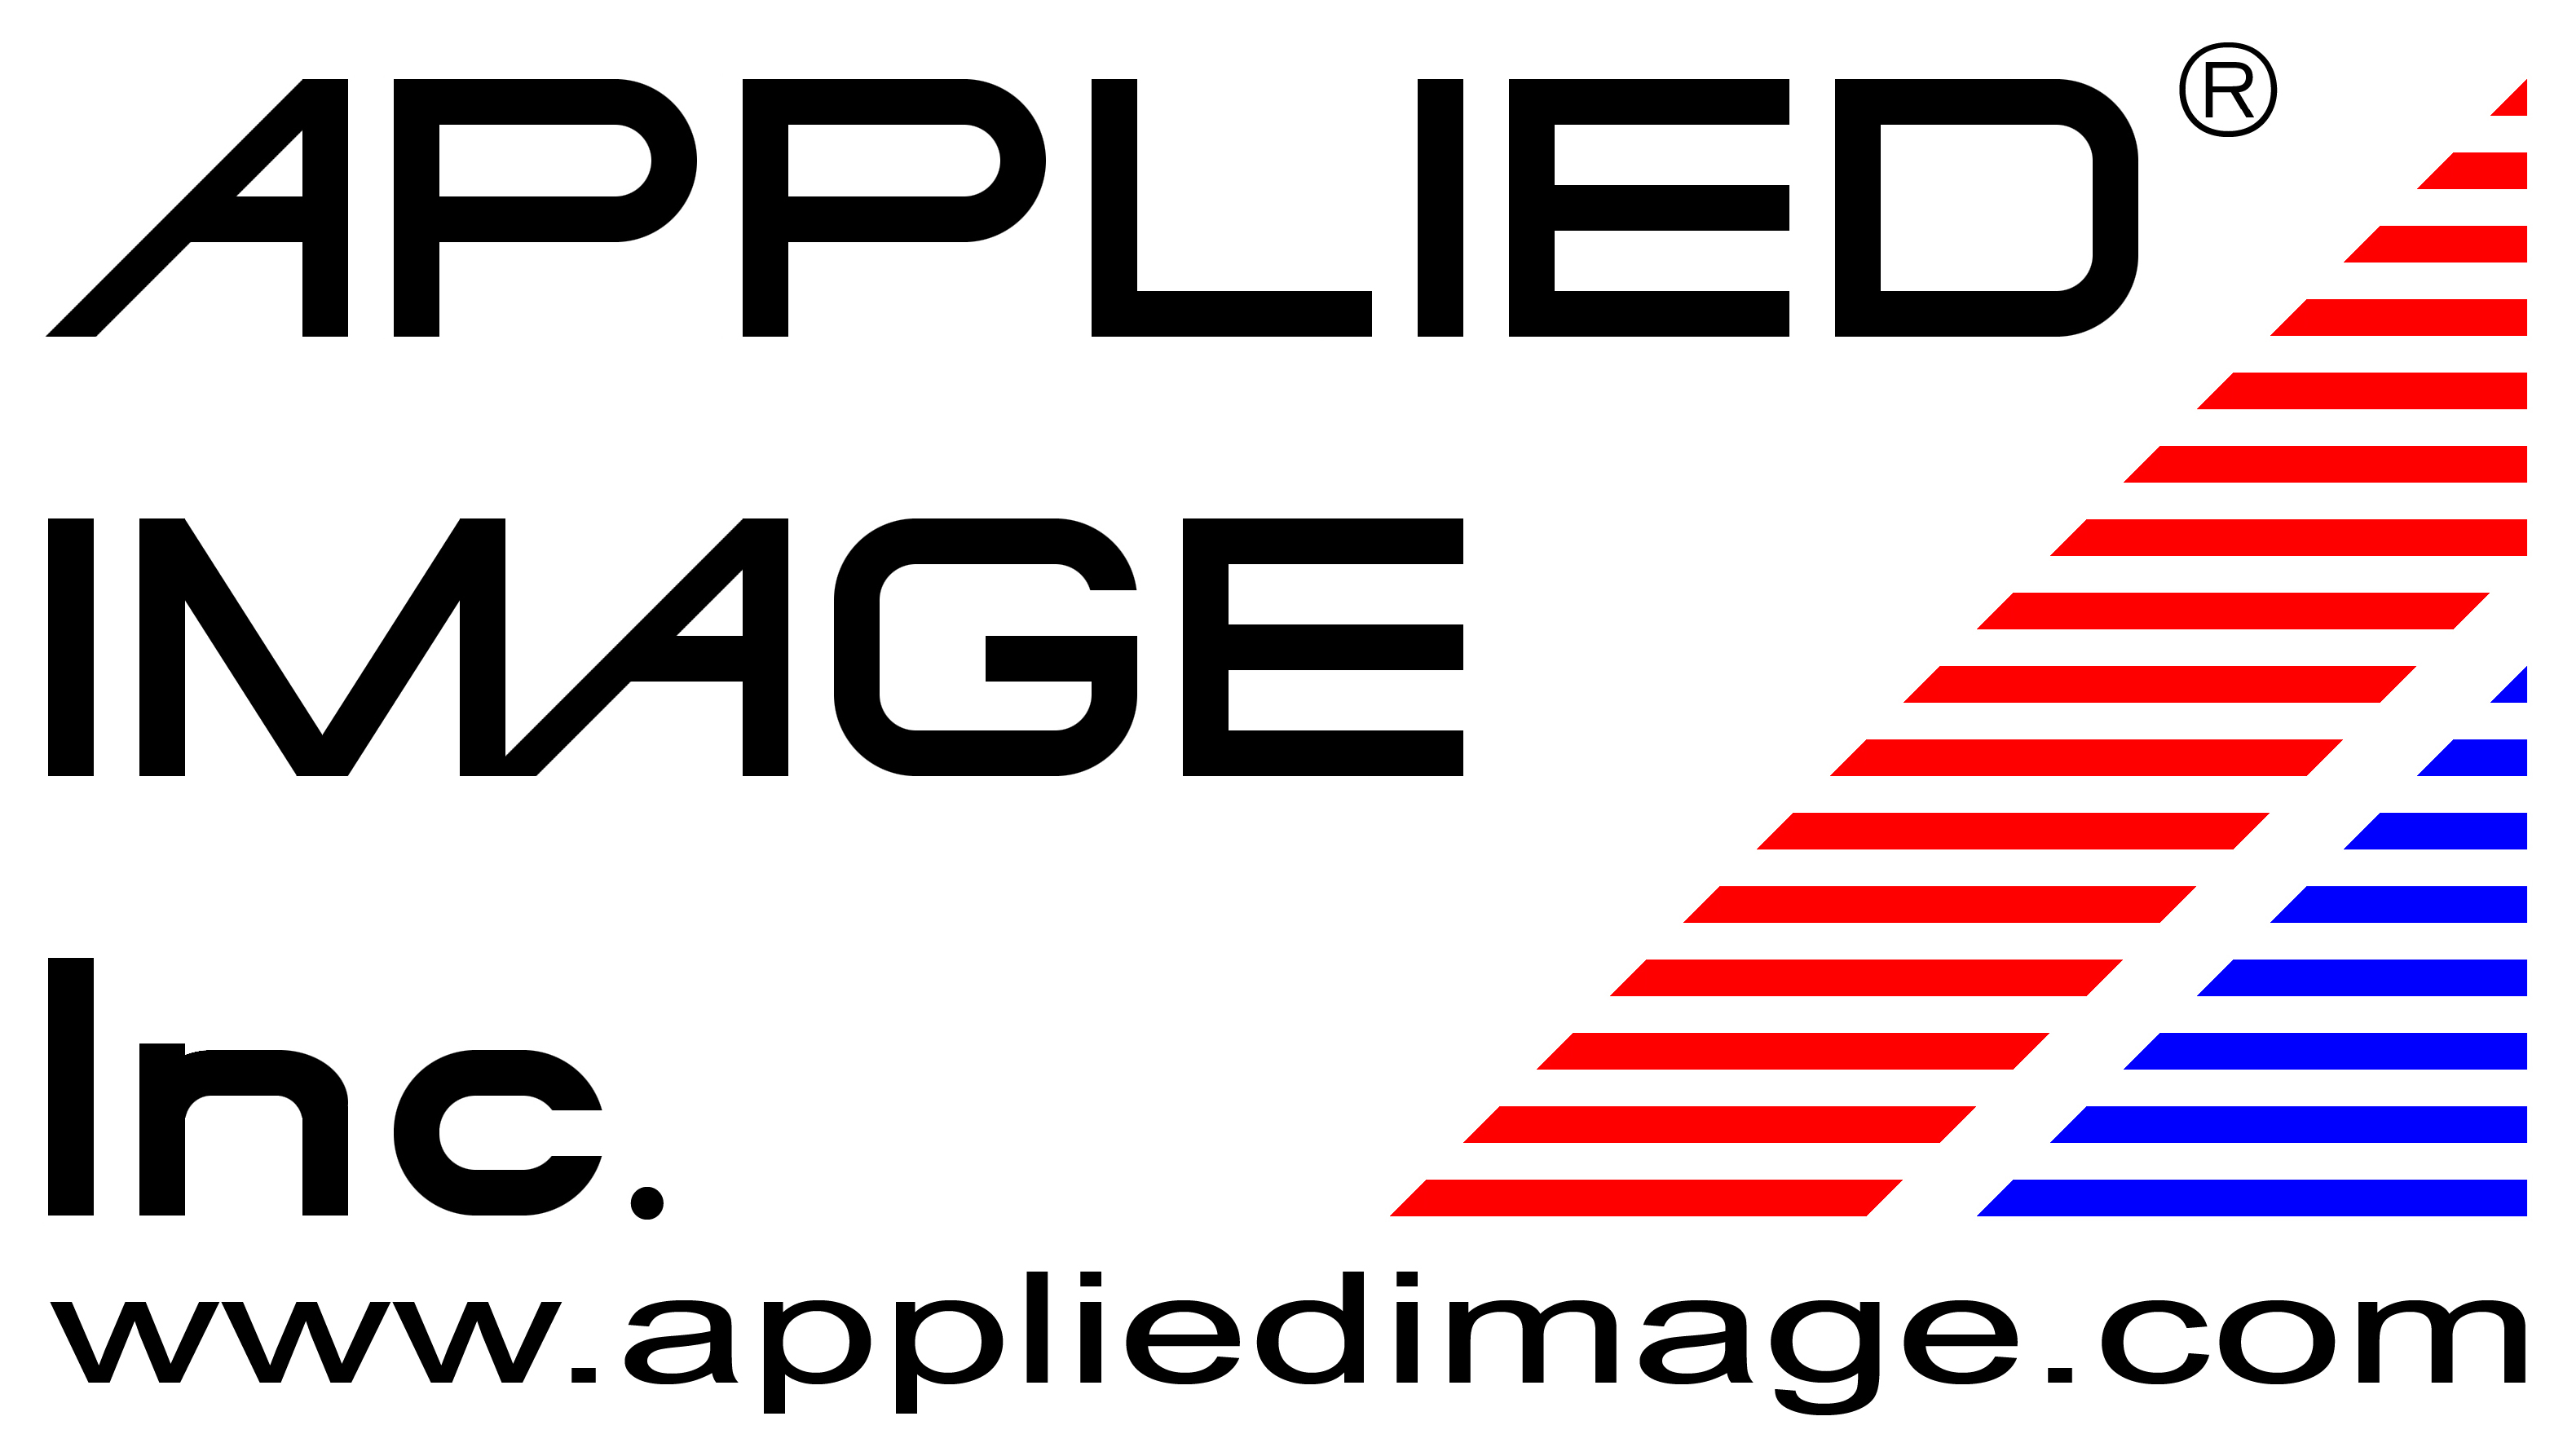 Applied Image